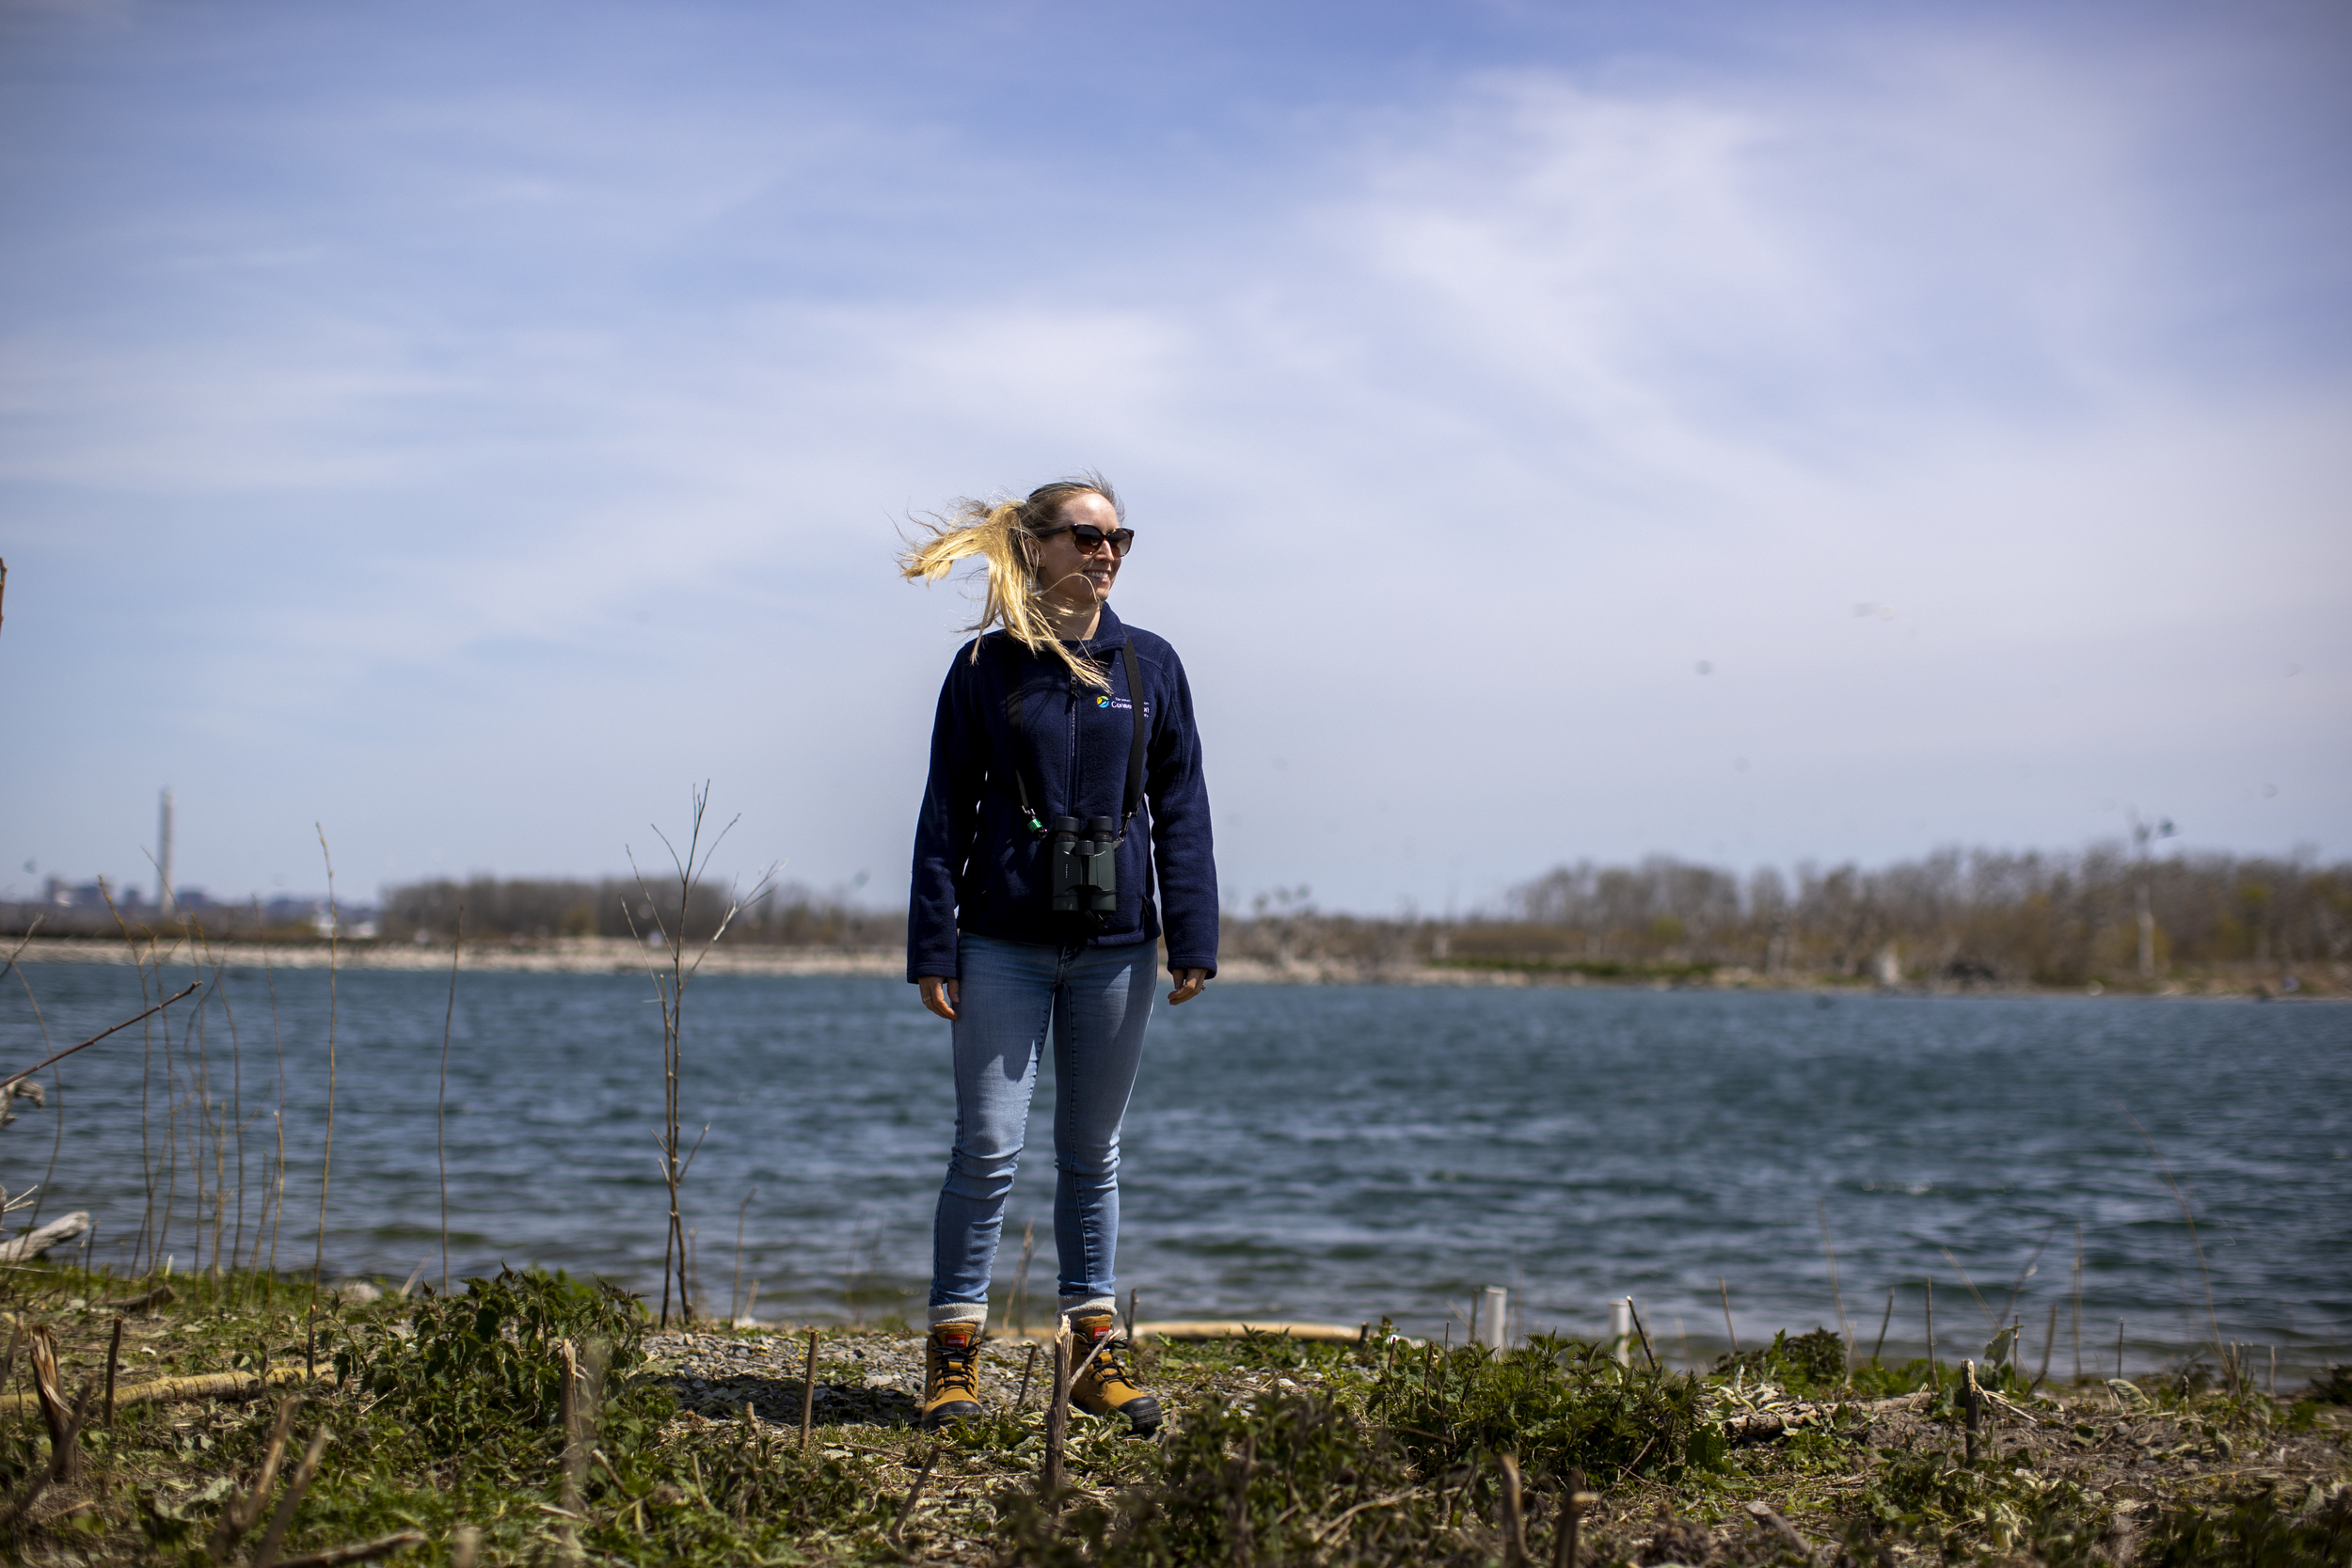 Tommy Thompson Park project manager Andrea Chreston is pictured in sunglasses, jeans, and hiking boots stands on a shoreline in front of water as her blonde ponytail blows in the wind.